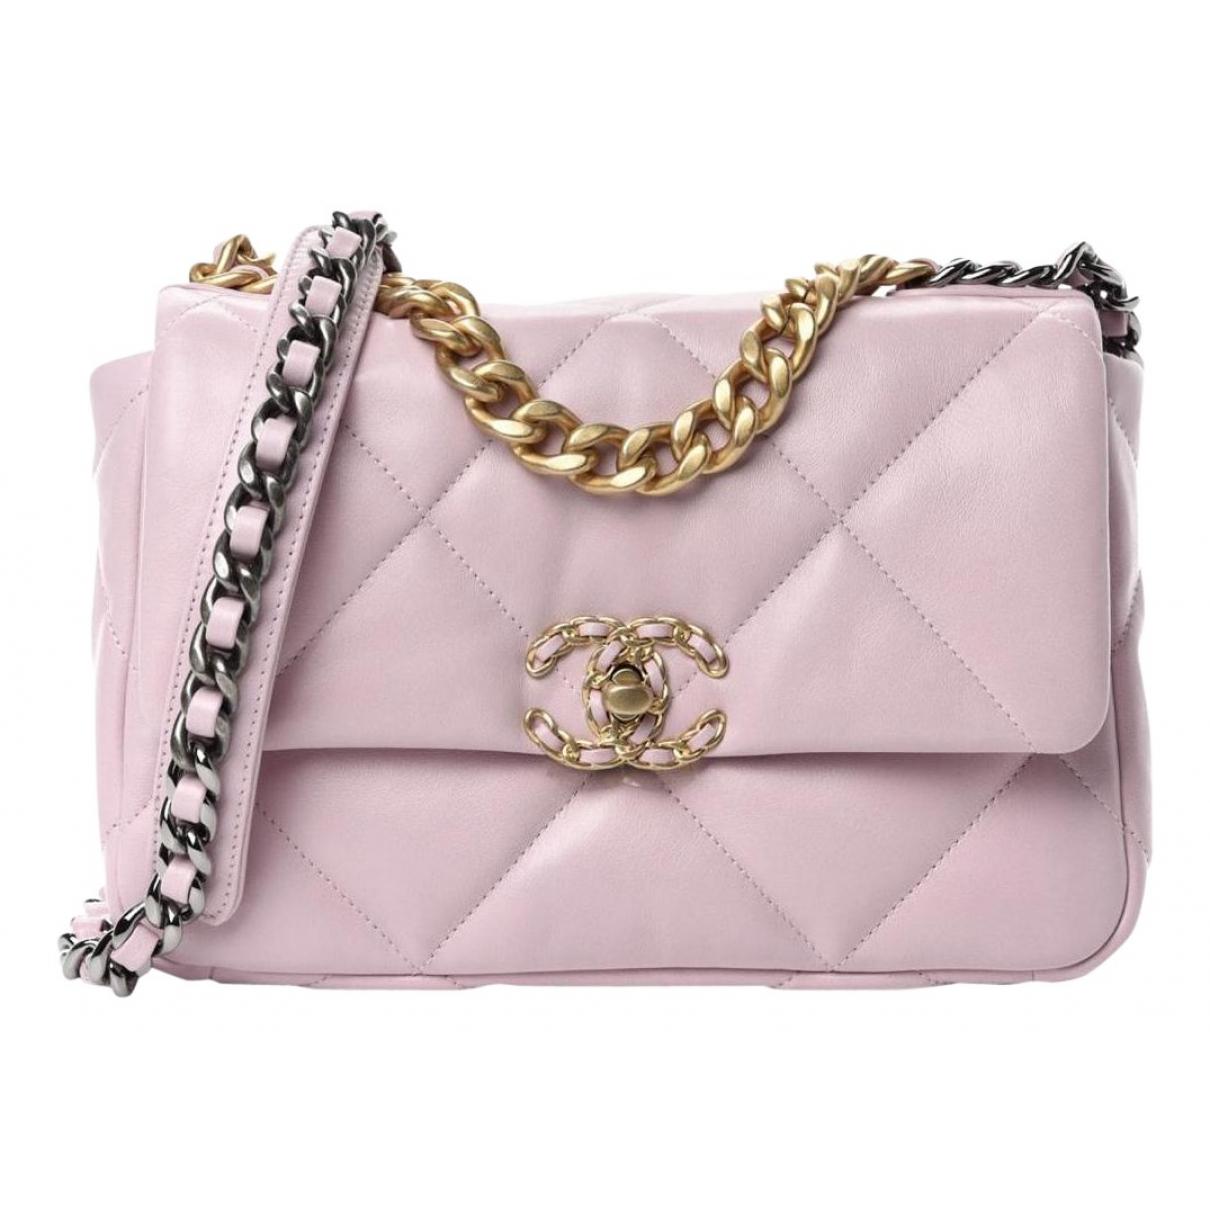 Chanel 19 leather handbag Chanel Pink in Leather - 24984095